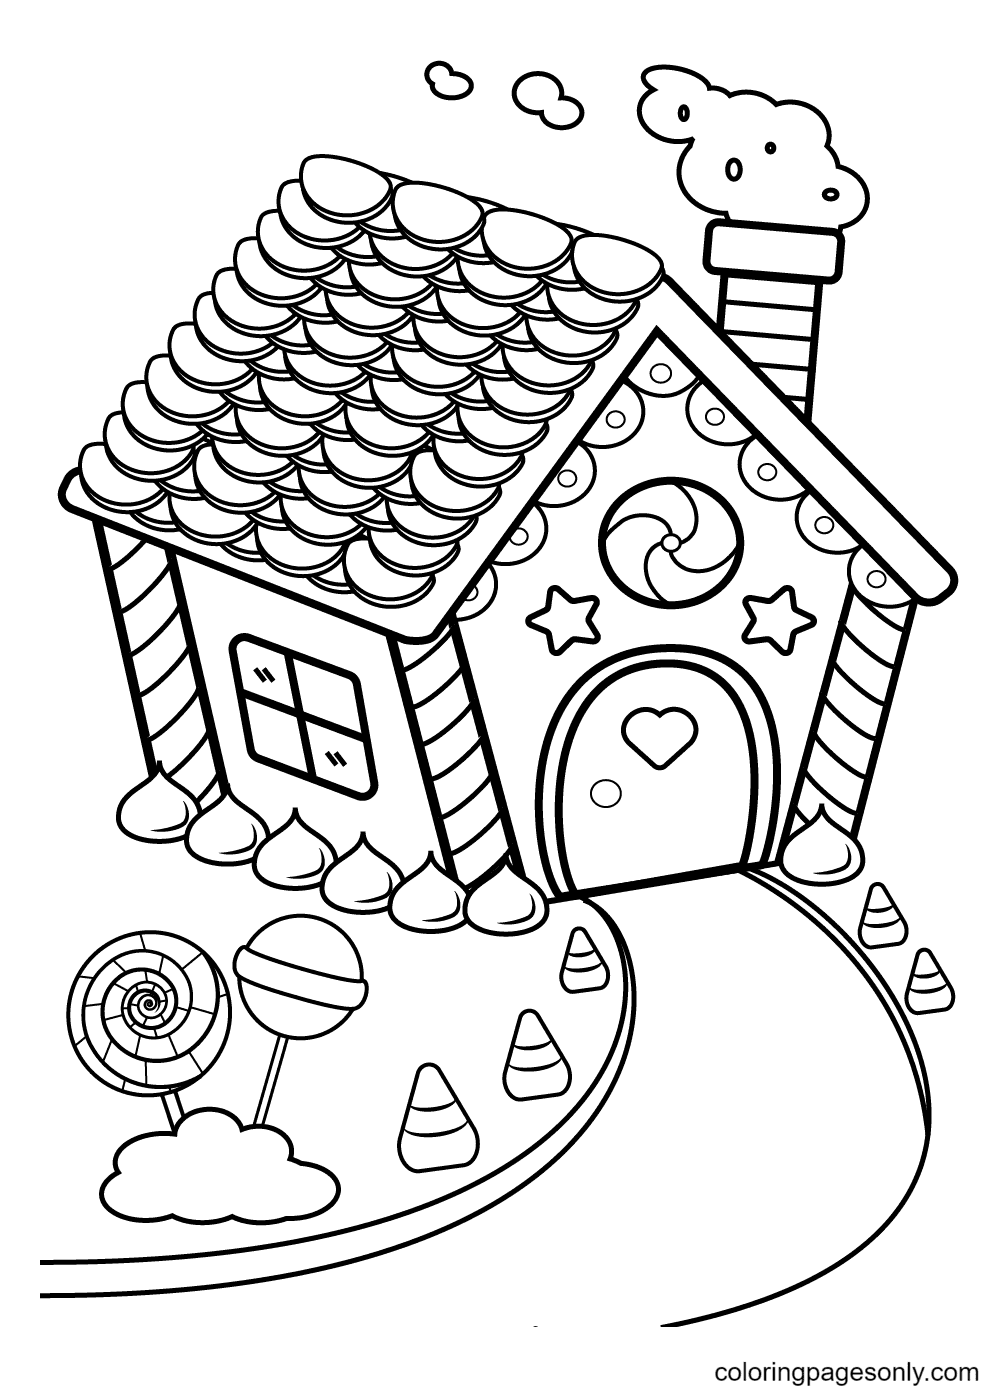 Candy House Coloring Pages